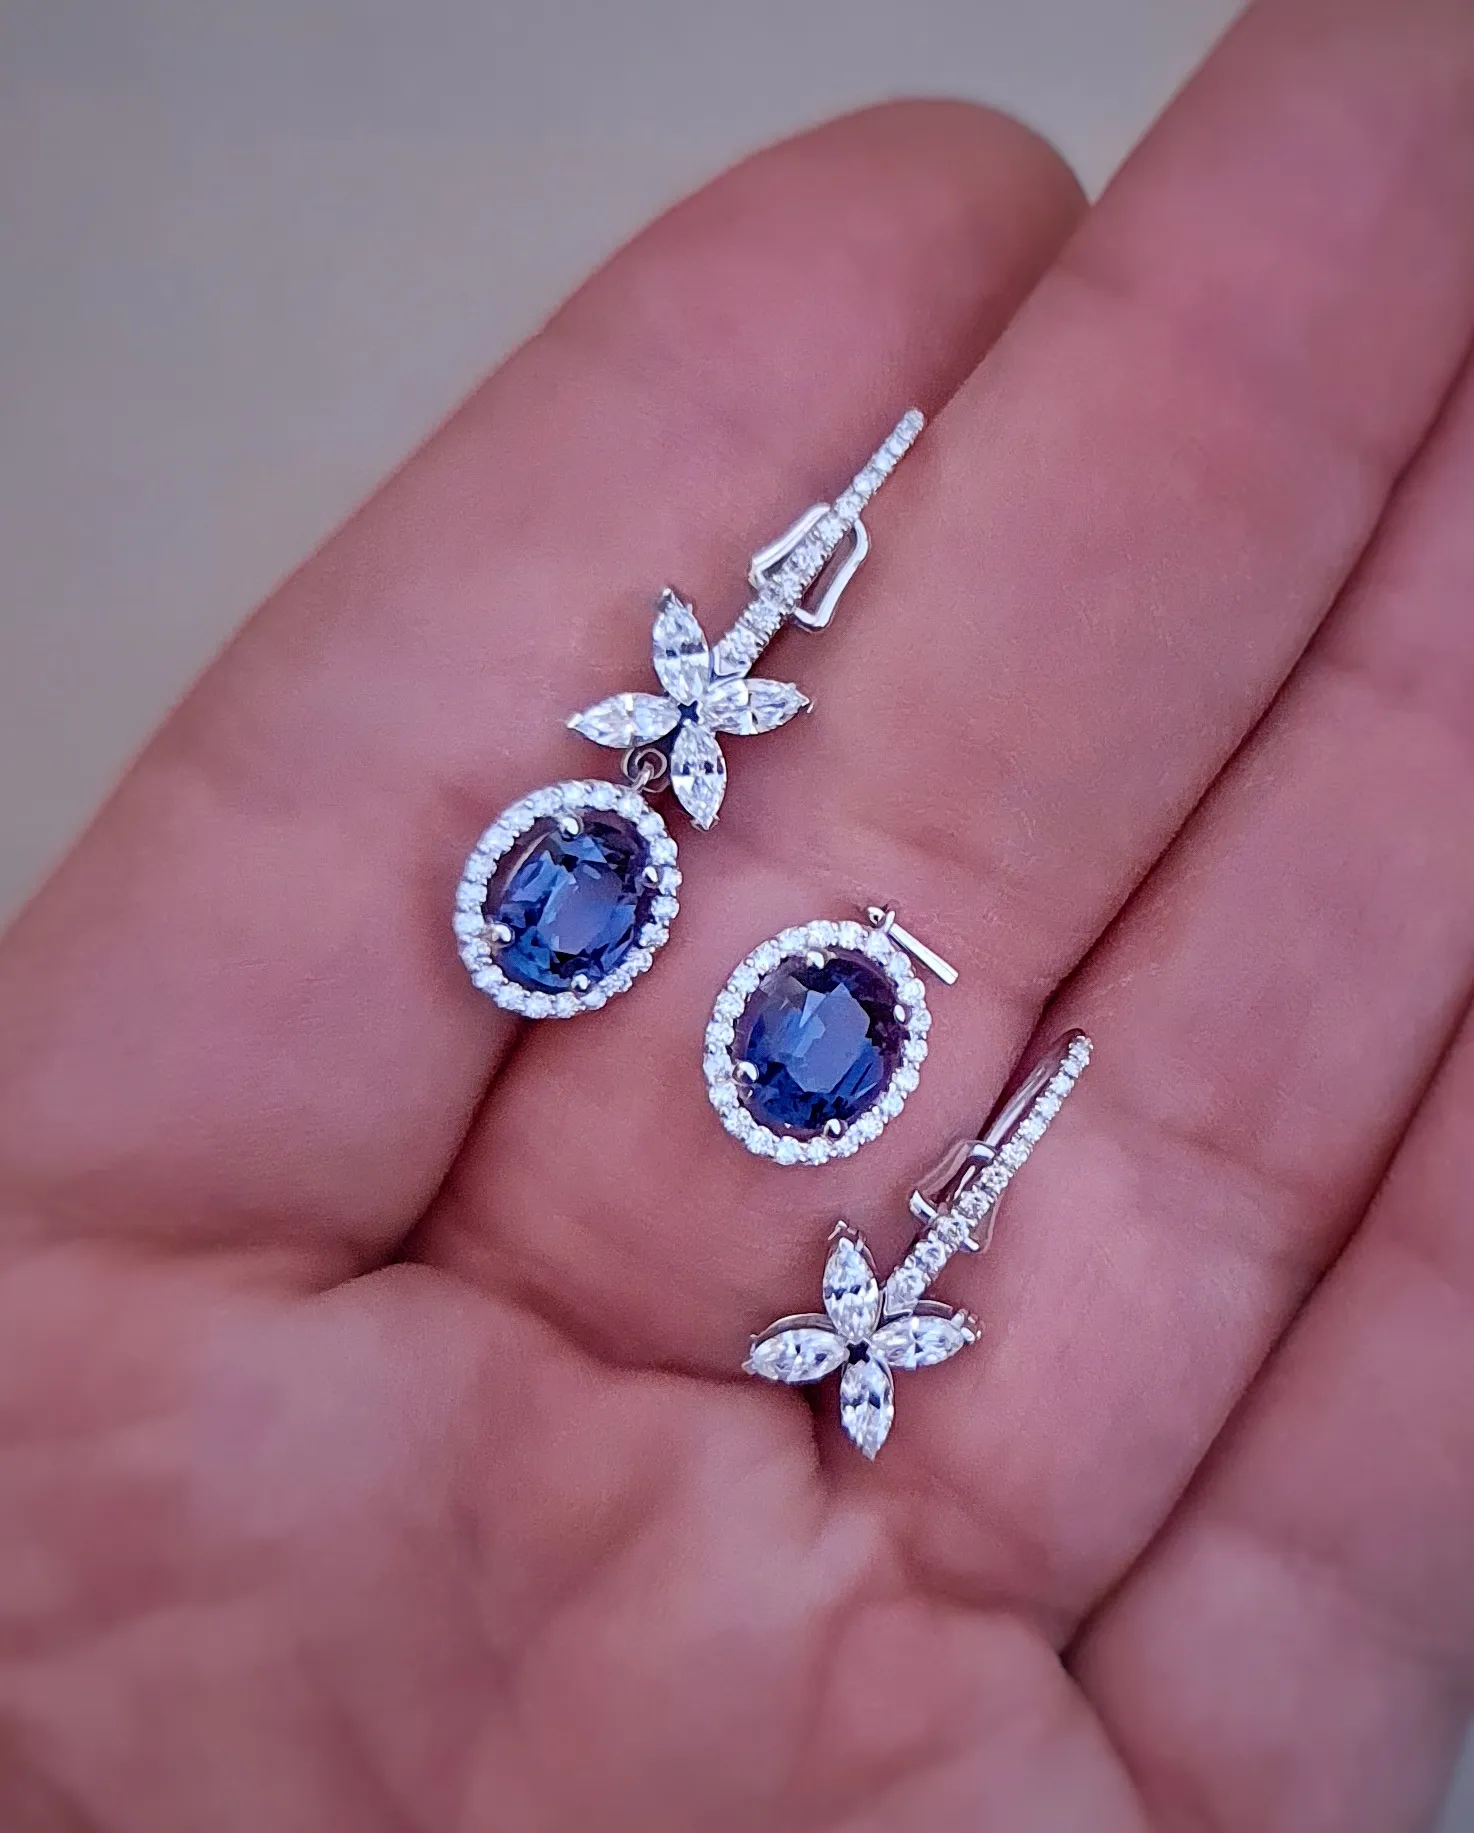 Transformer Earrings with Spinel Pendant 3.18 ct.